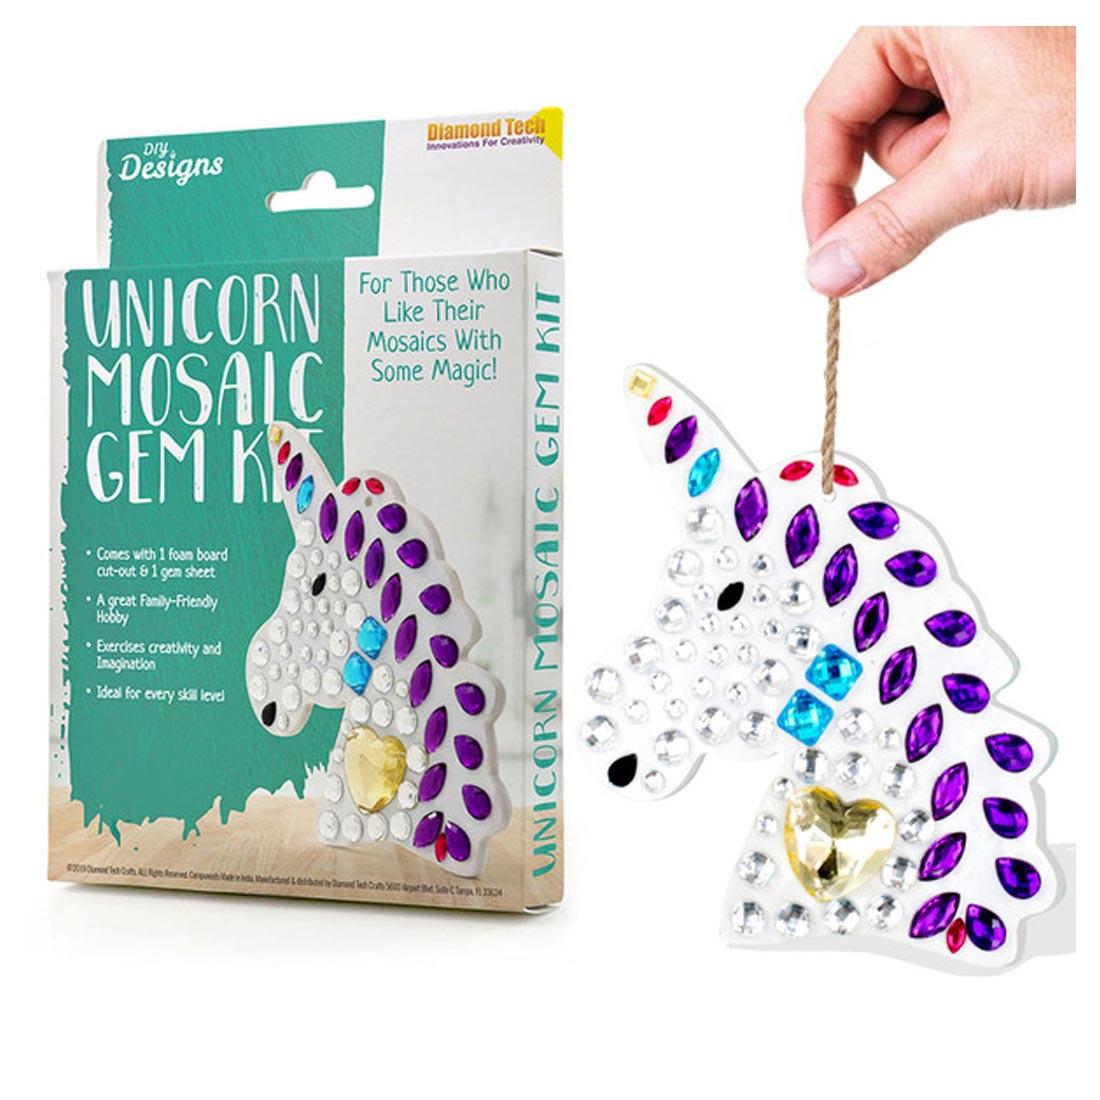 Unicorn Mosaic Gem Kit Package Shown Beside a Completed Unicorn hanging from a string